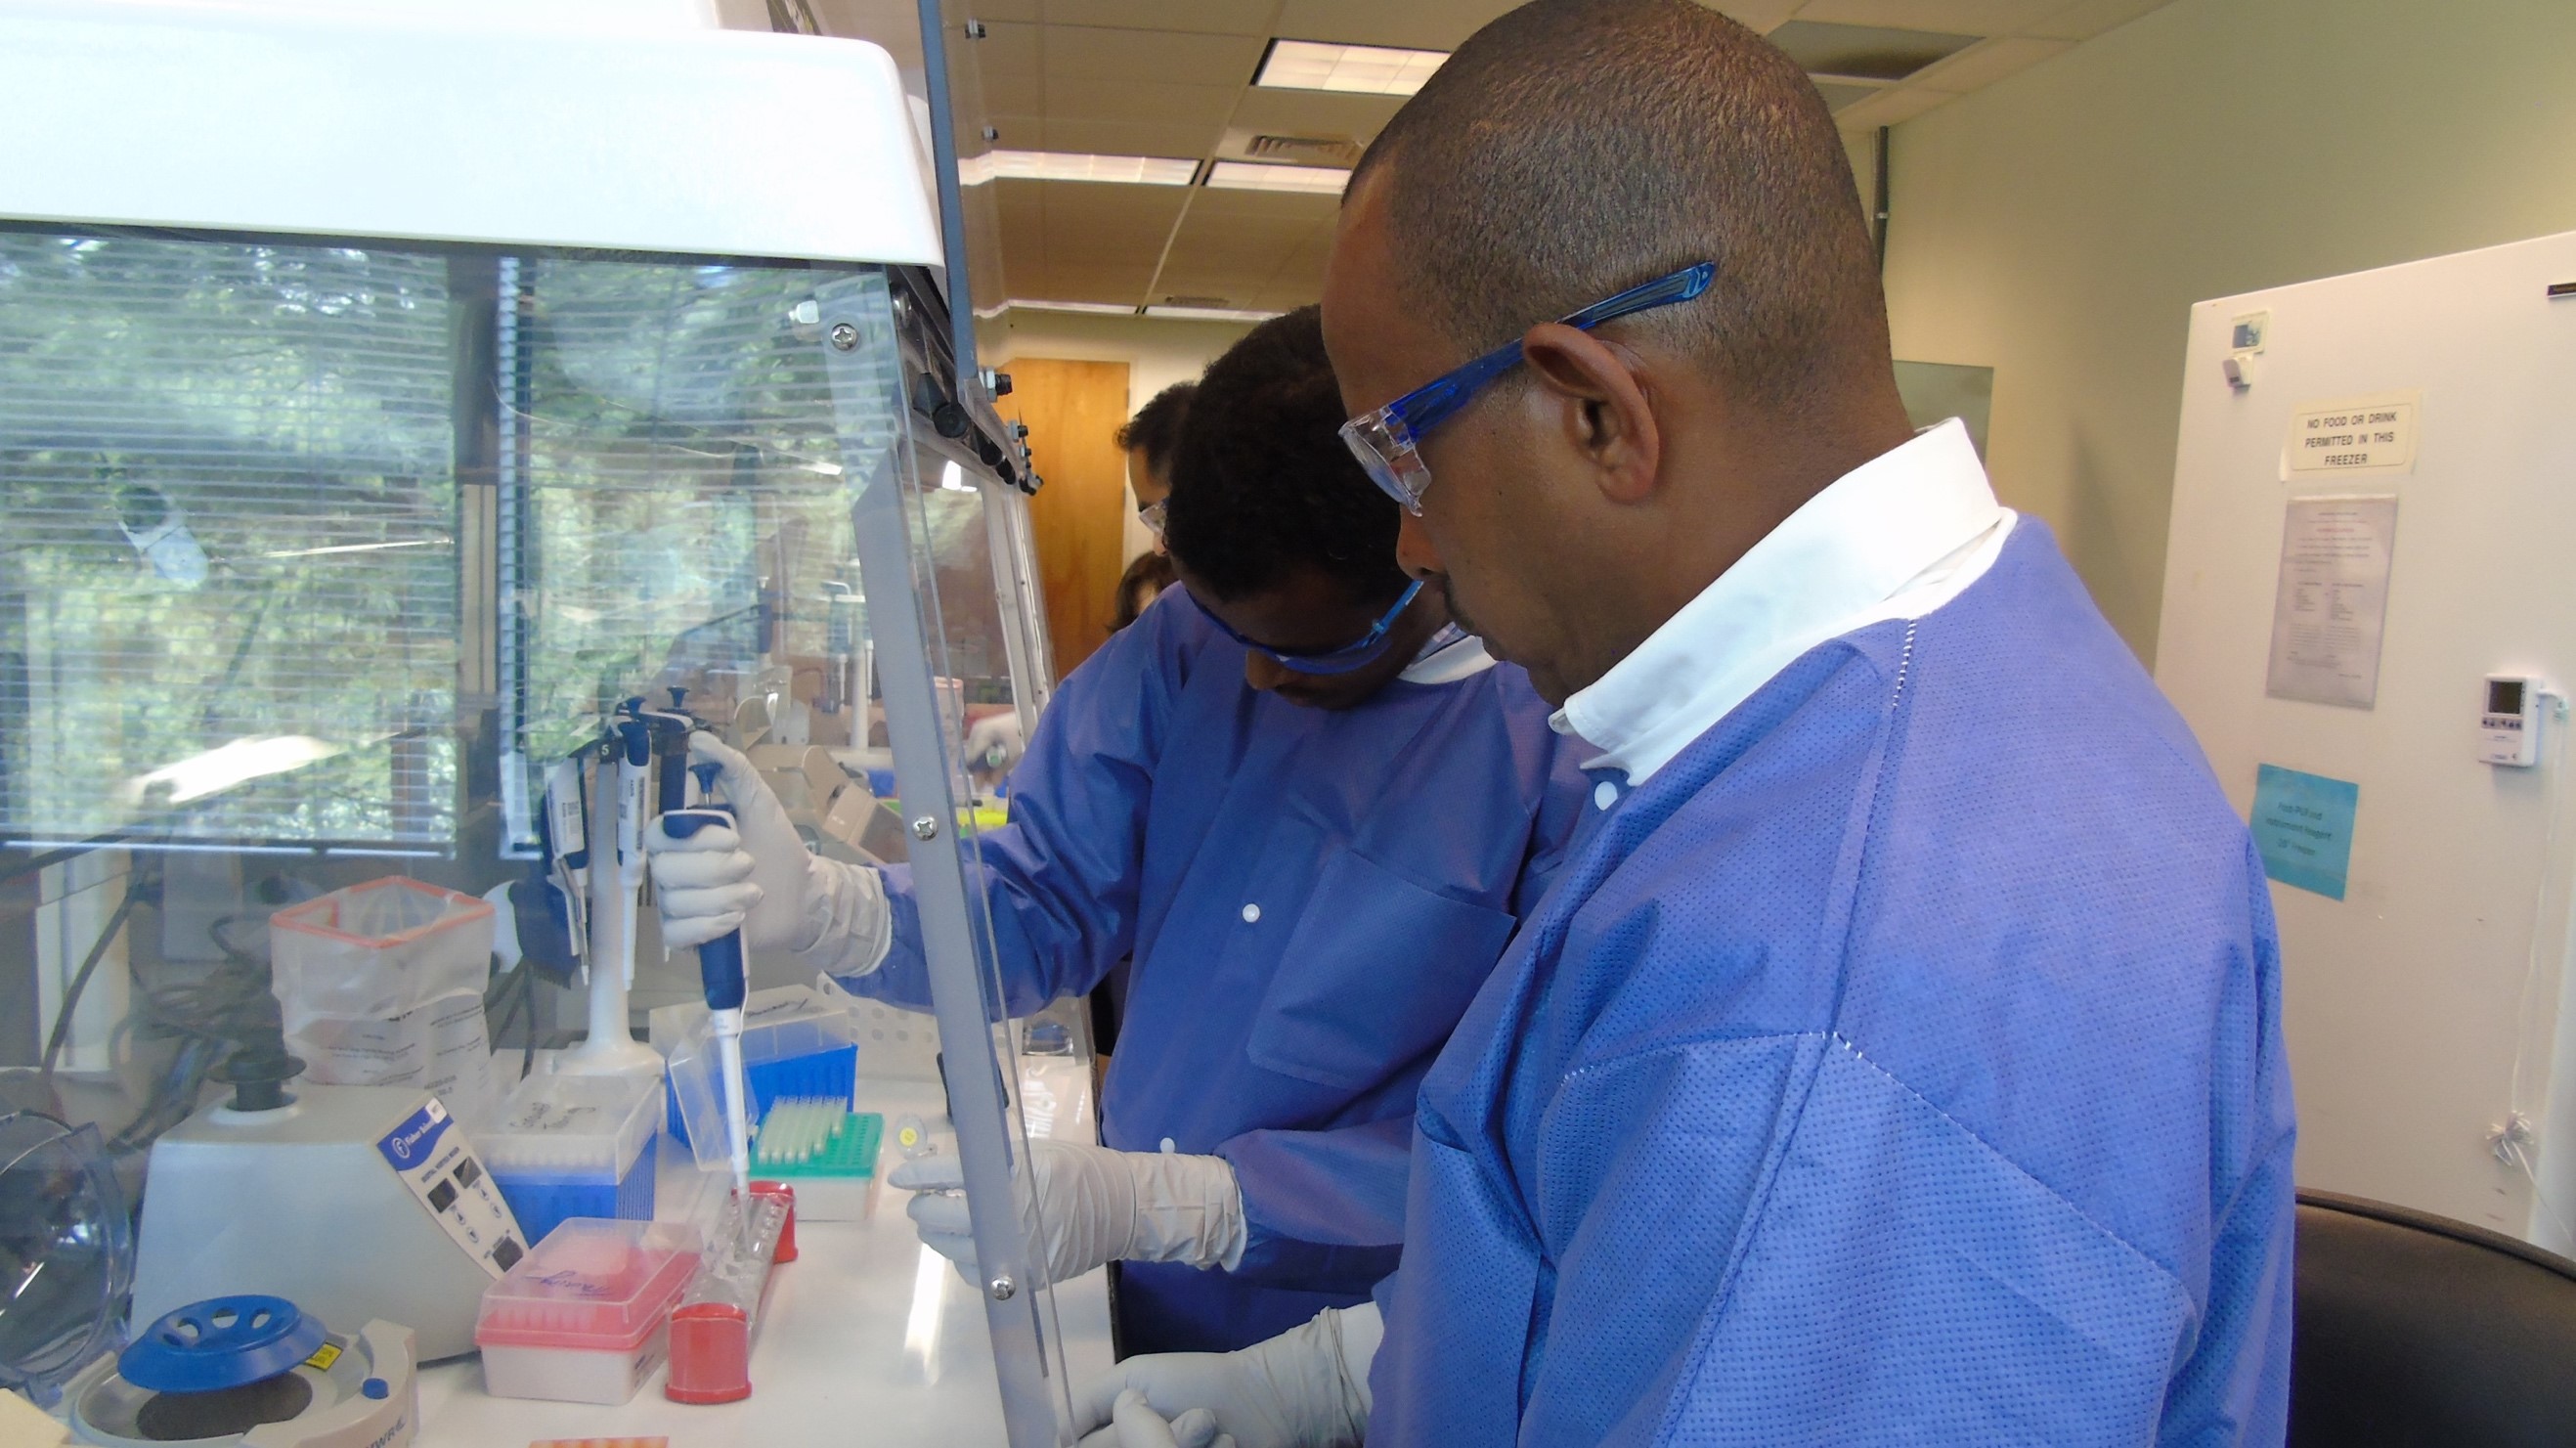 Scientists from Ethiopia came to Los Alamos to participate in an annual sequencing and bioinformatics training as part of Bioscience Division’s on-going bioengagement programs. The 2019 training was held in May (a week prior to the Sequencing, Finishing, and Analysis in the Future [SFAF] meeting) and included 28 participants from 11 countries.